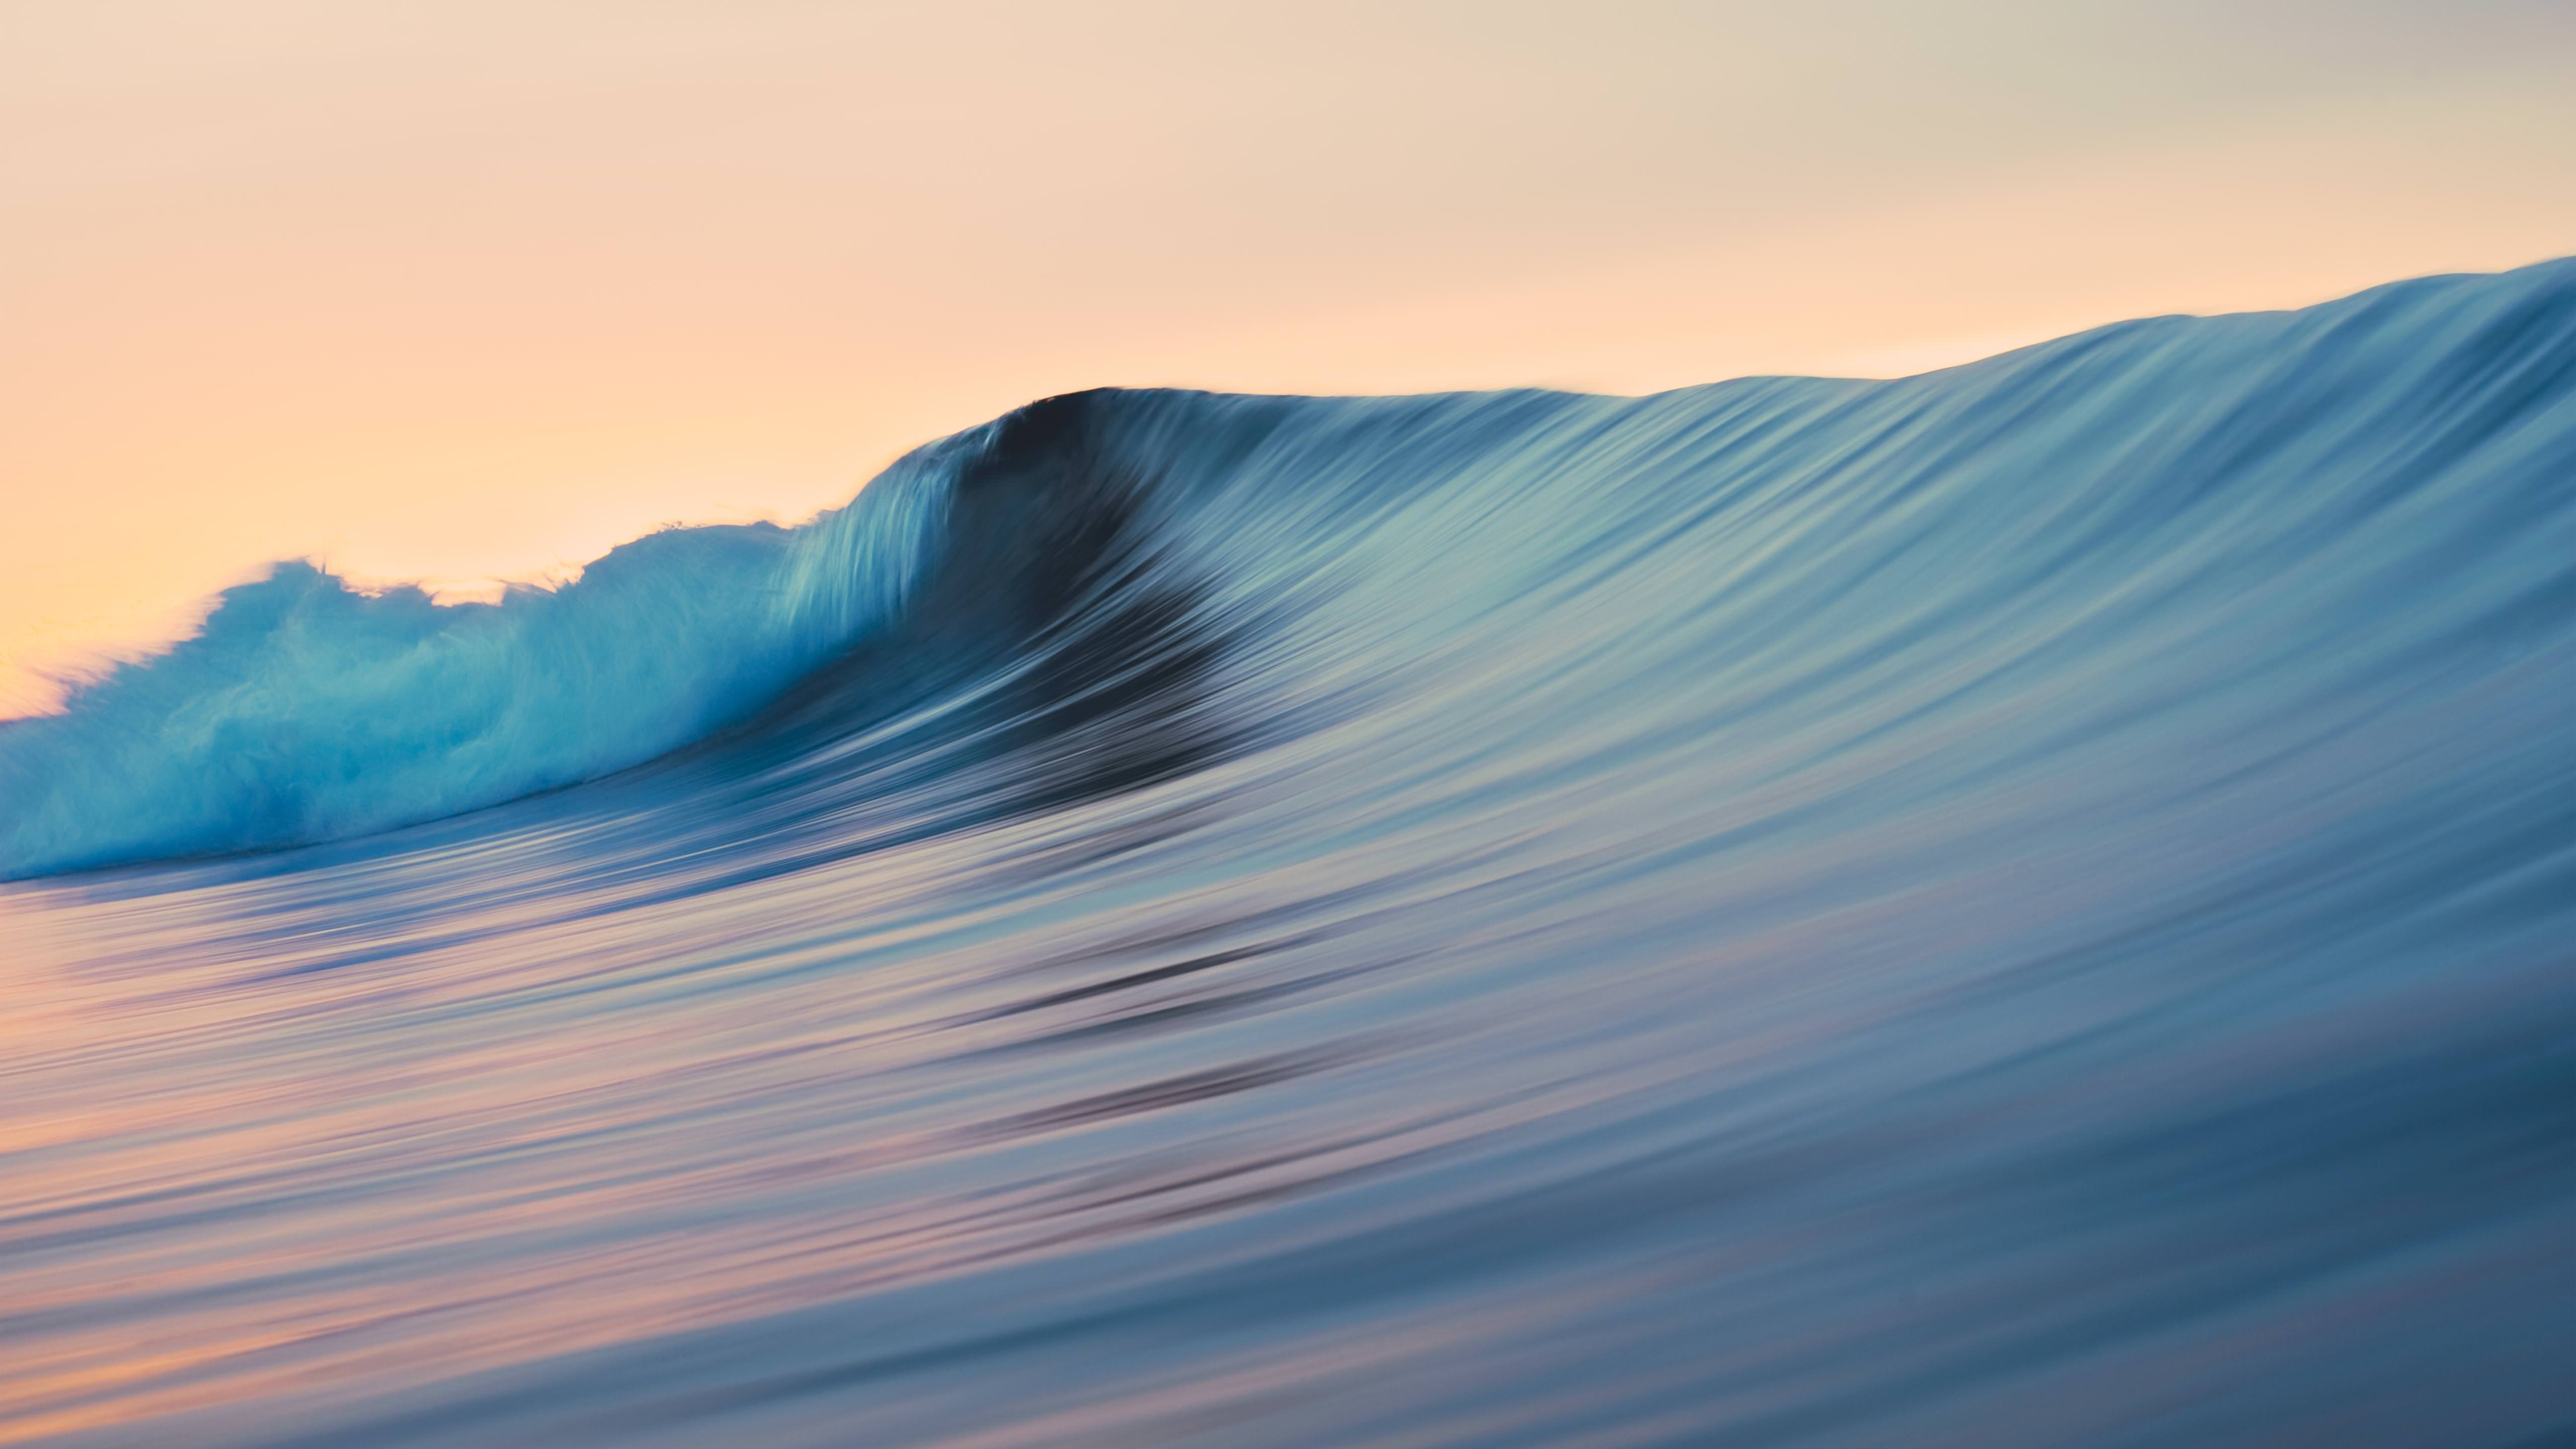 Surfing Wallpaper For Mac